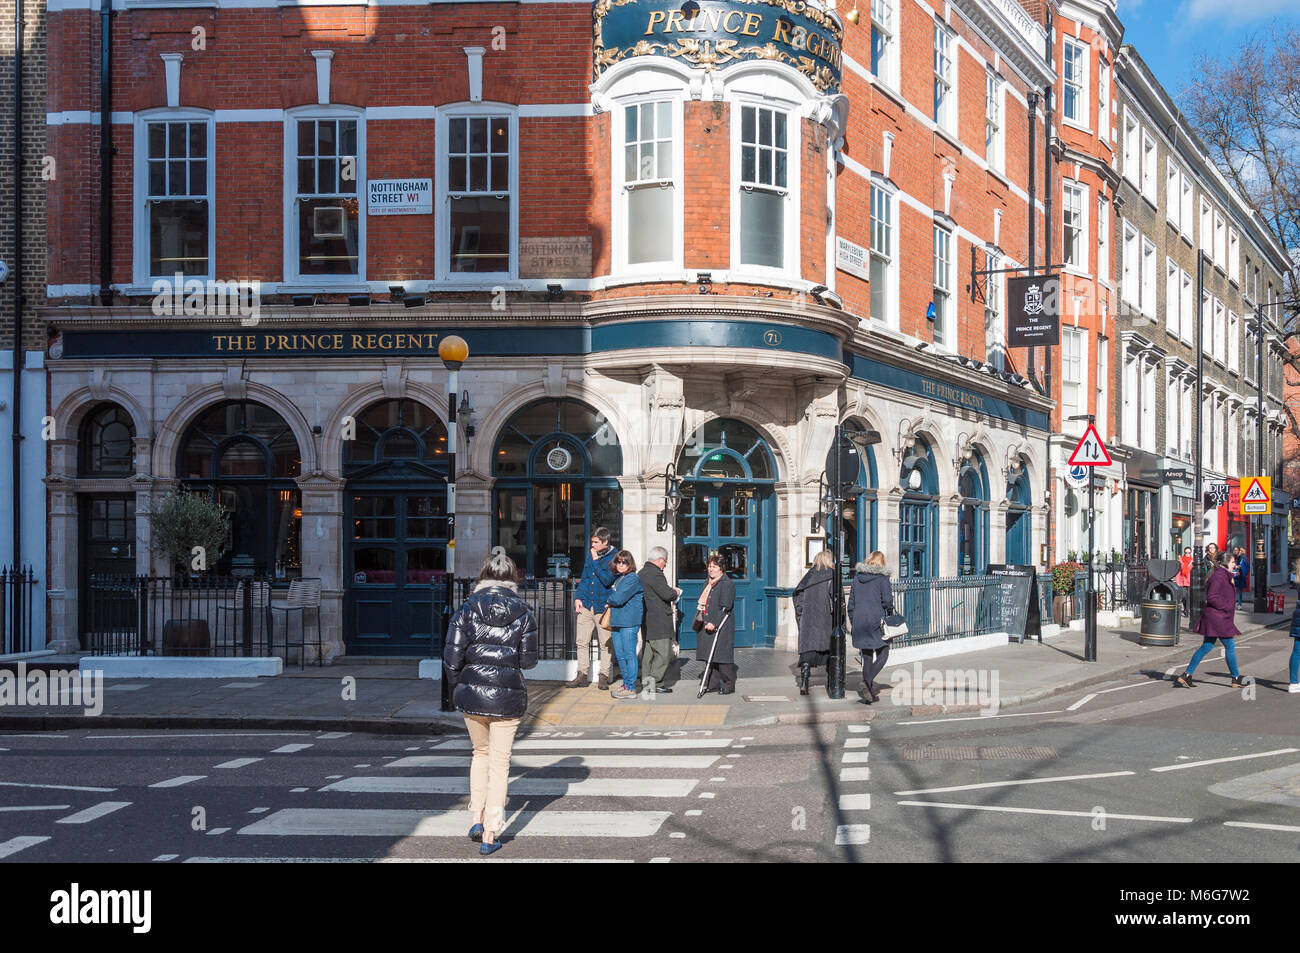 Exterior view of the Prince Regent pub in Marylebone High Street, London, England, UK Stock Photo